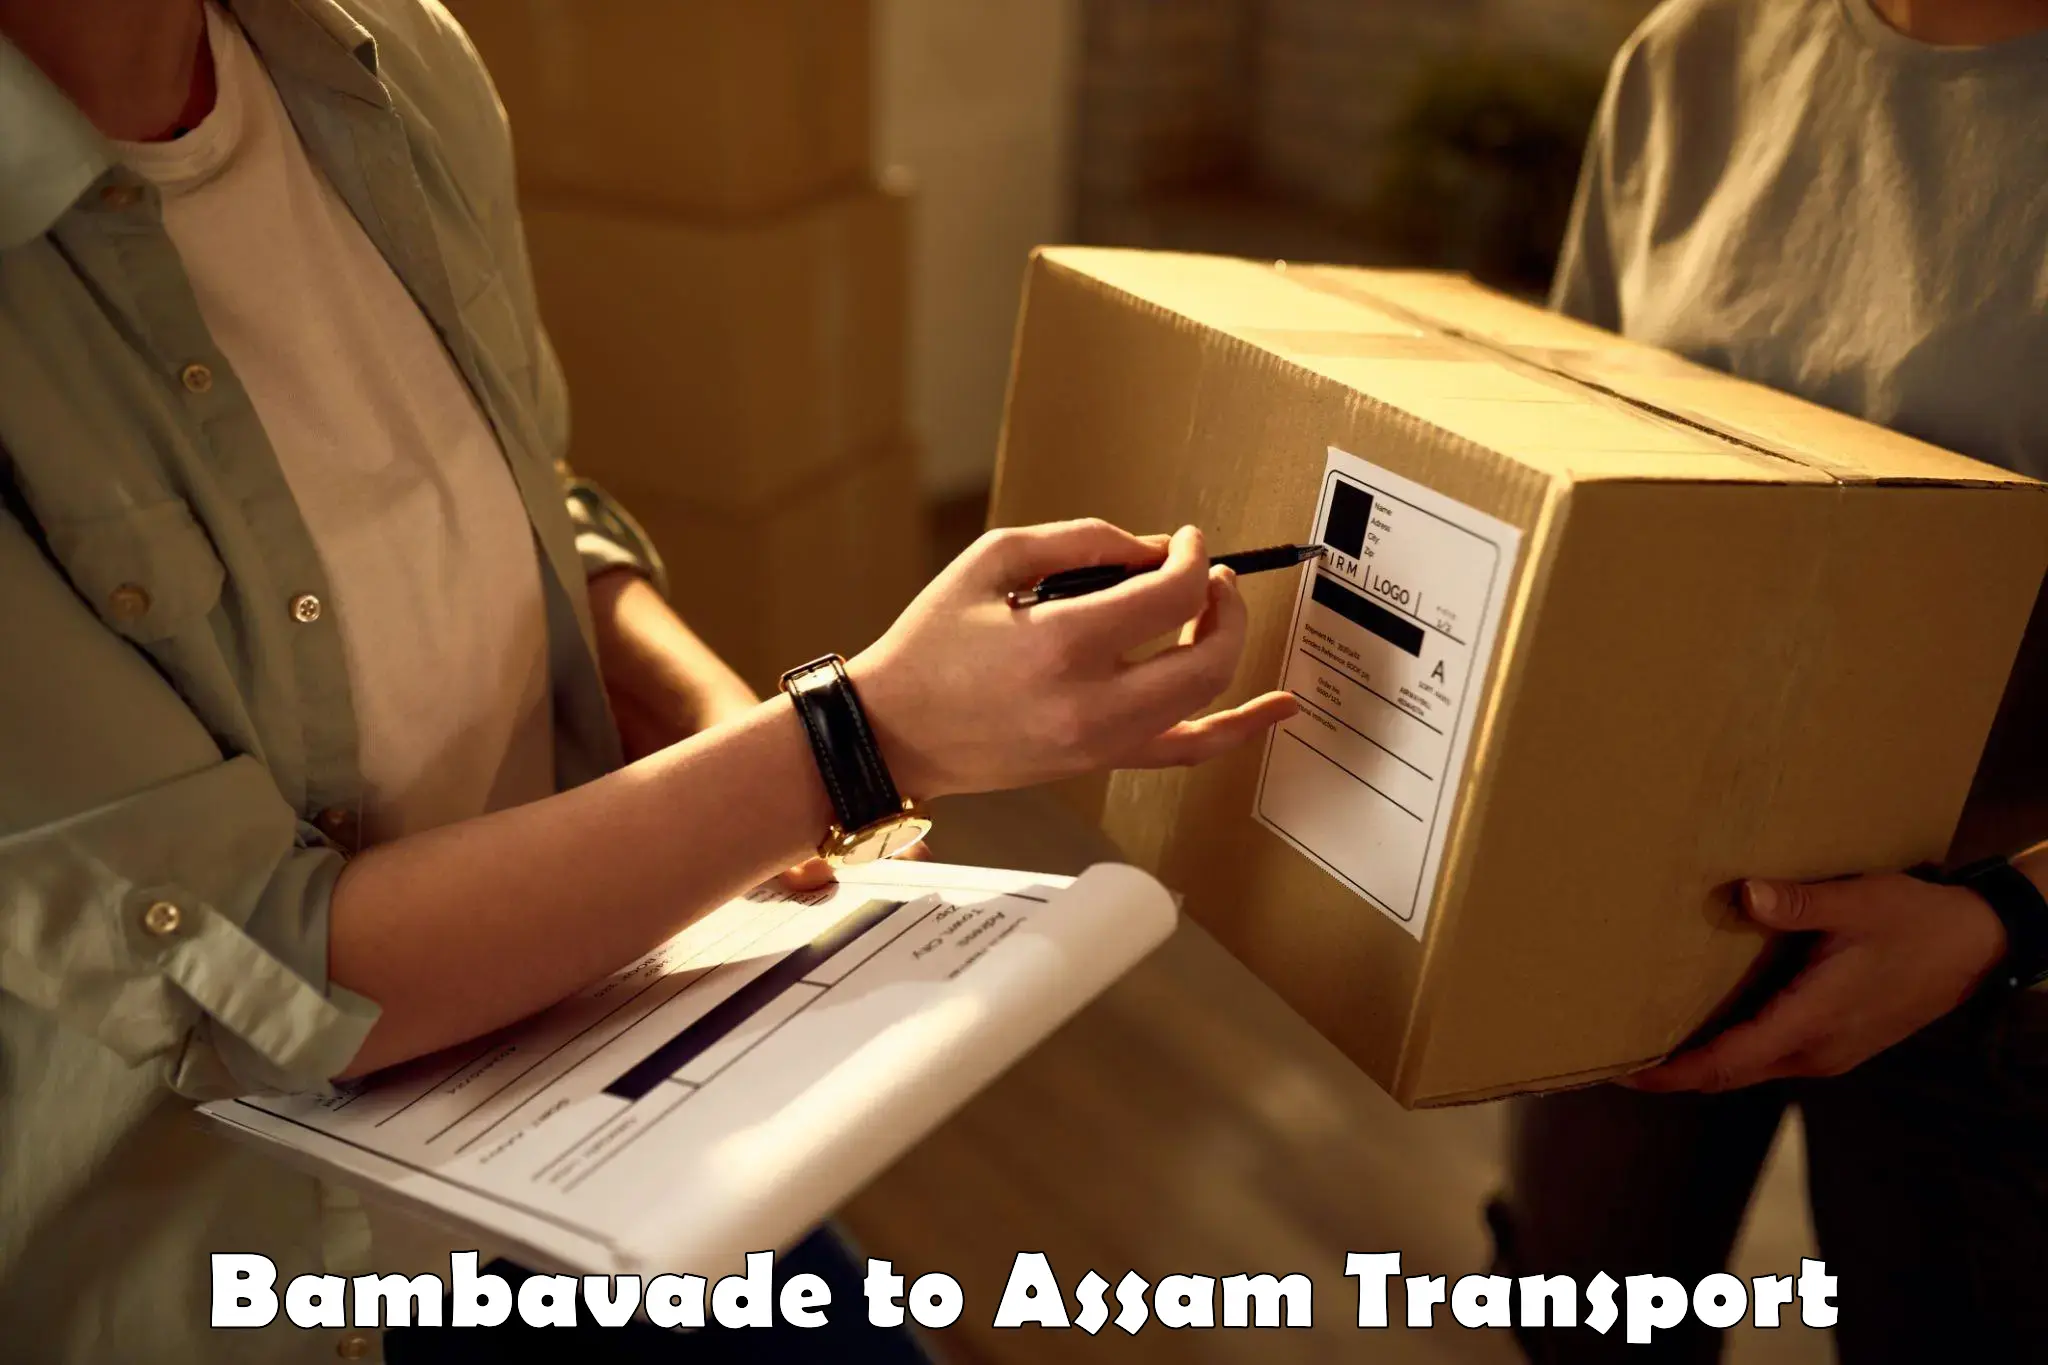 Container transportation services Bambavade to Assam